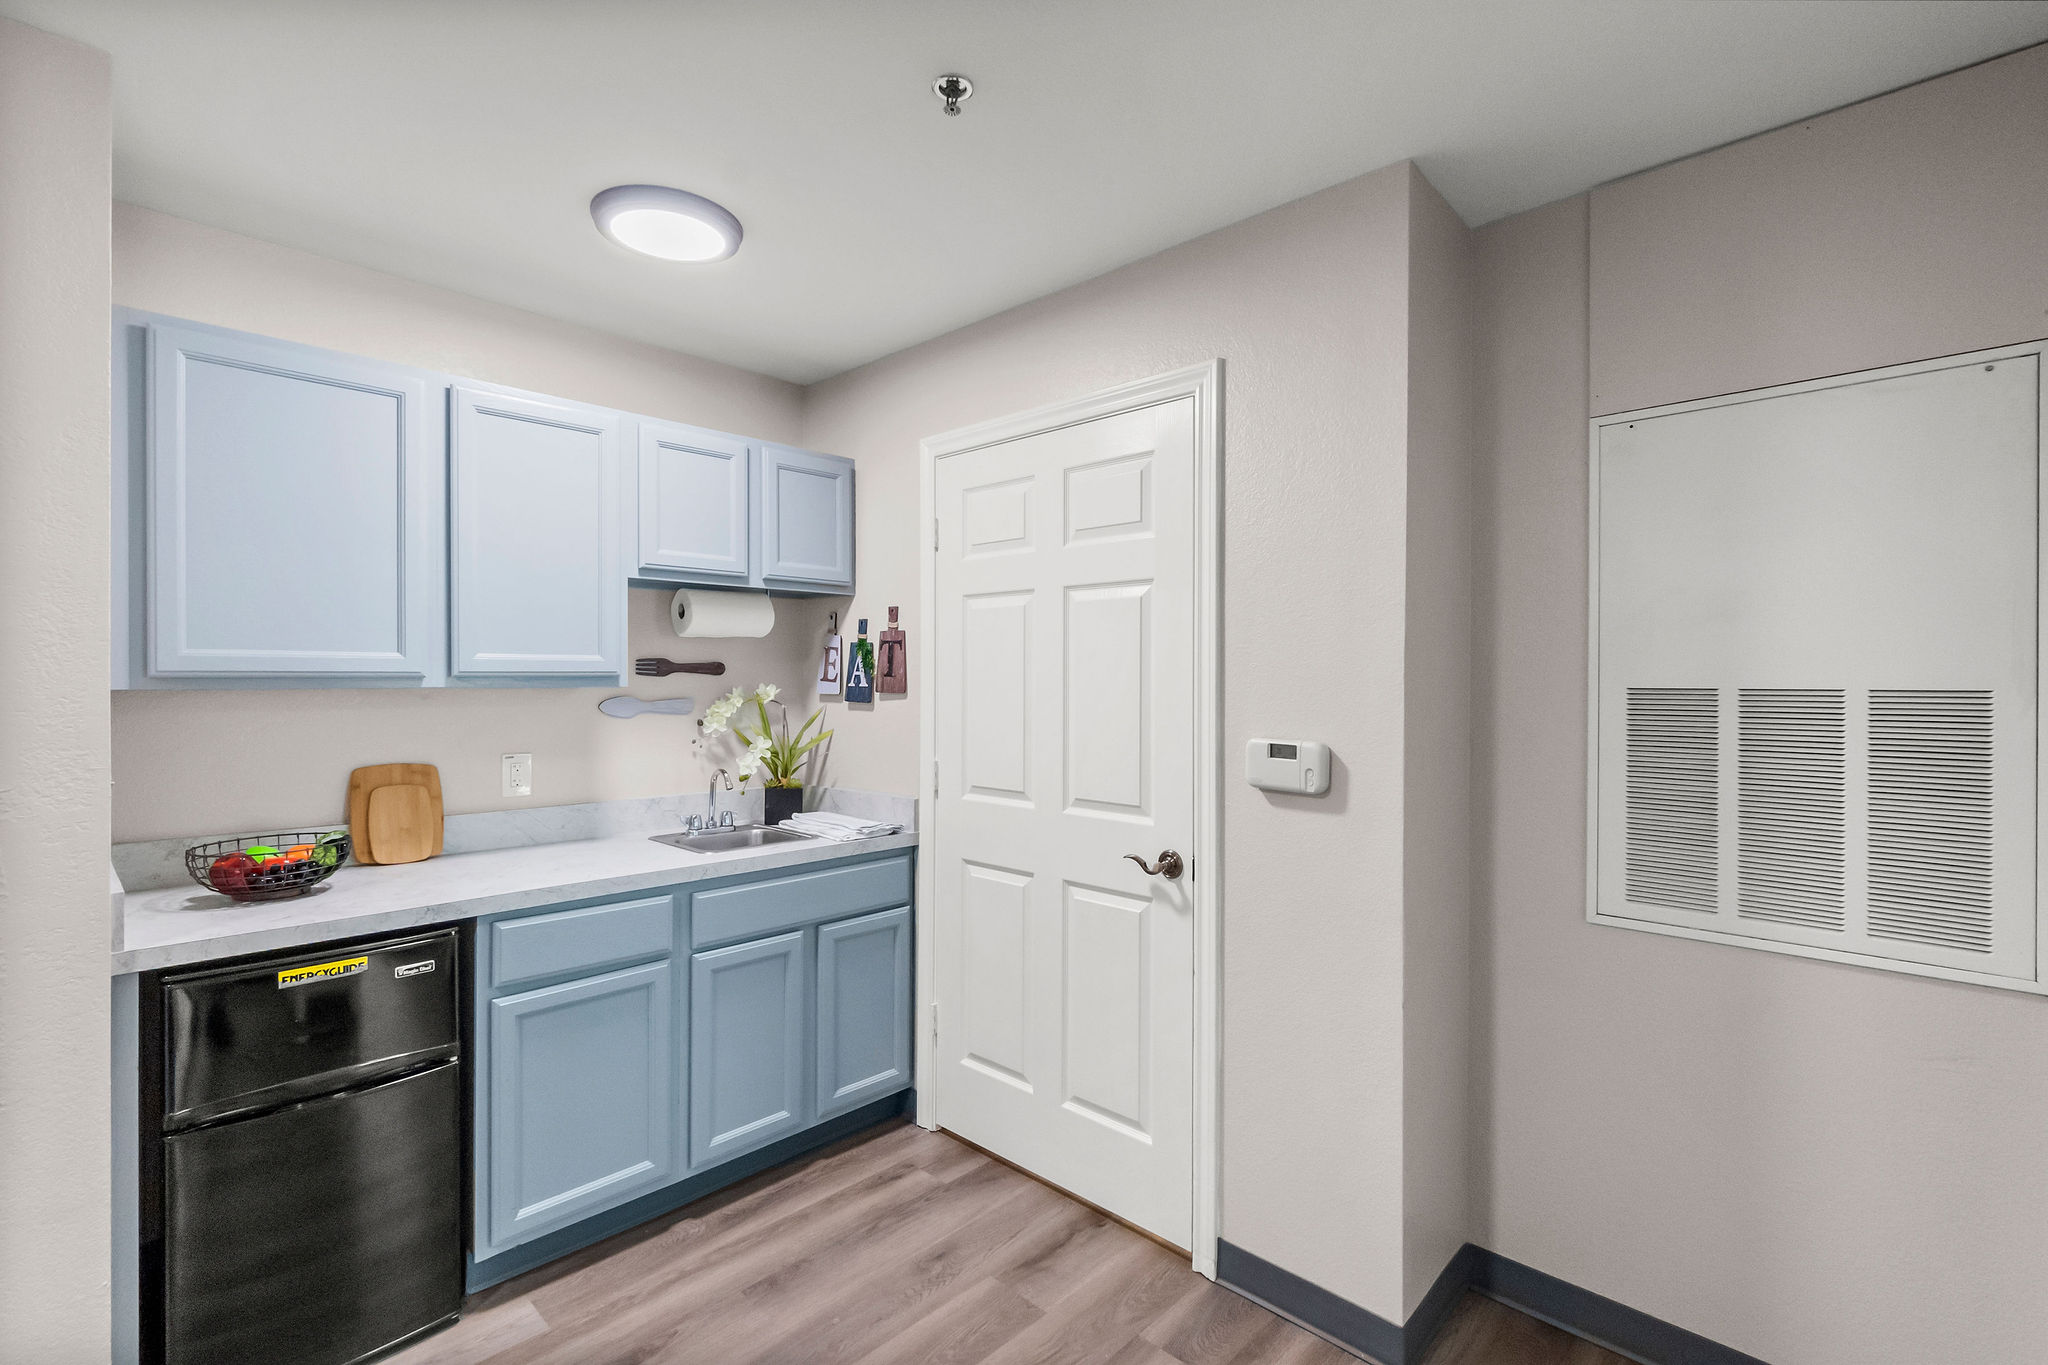 The kitchen and pantry of an apartment at Sundale Senior Living in Huntsville, TX